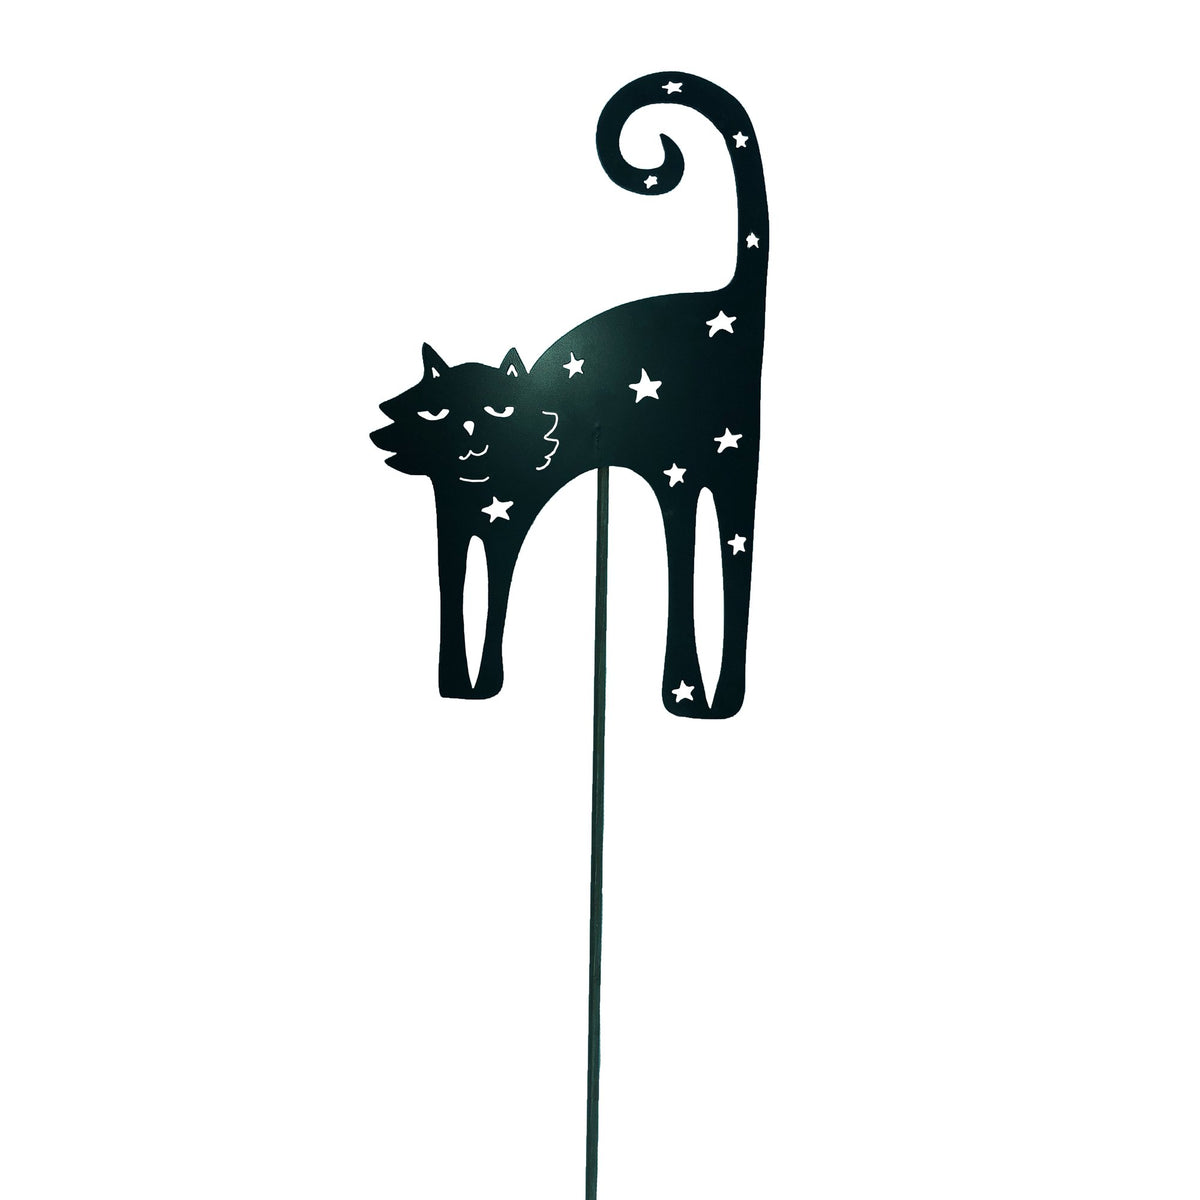 Black Cat Metal Garden Stake with punched out stars